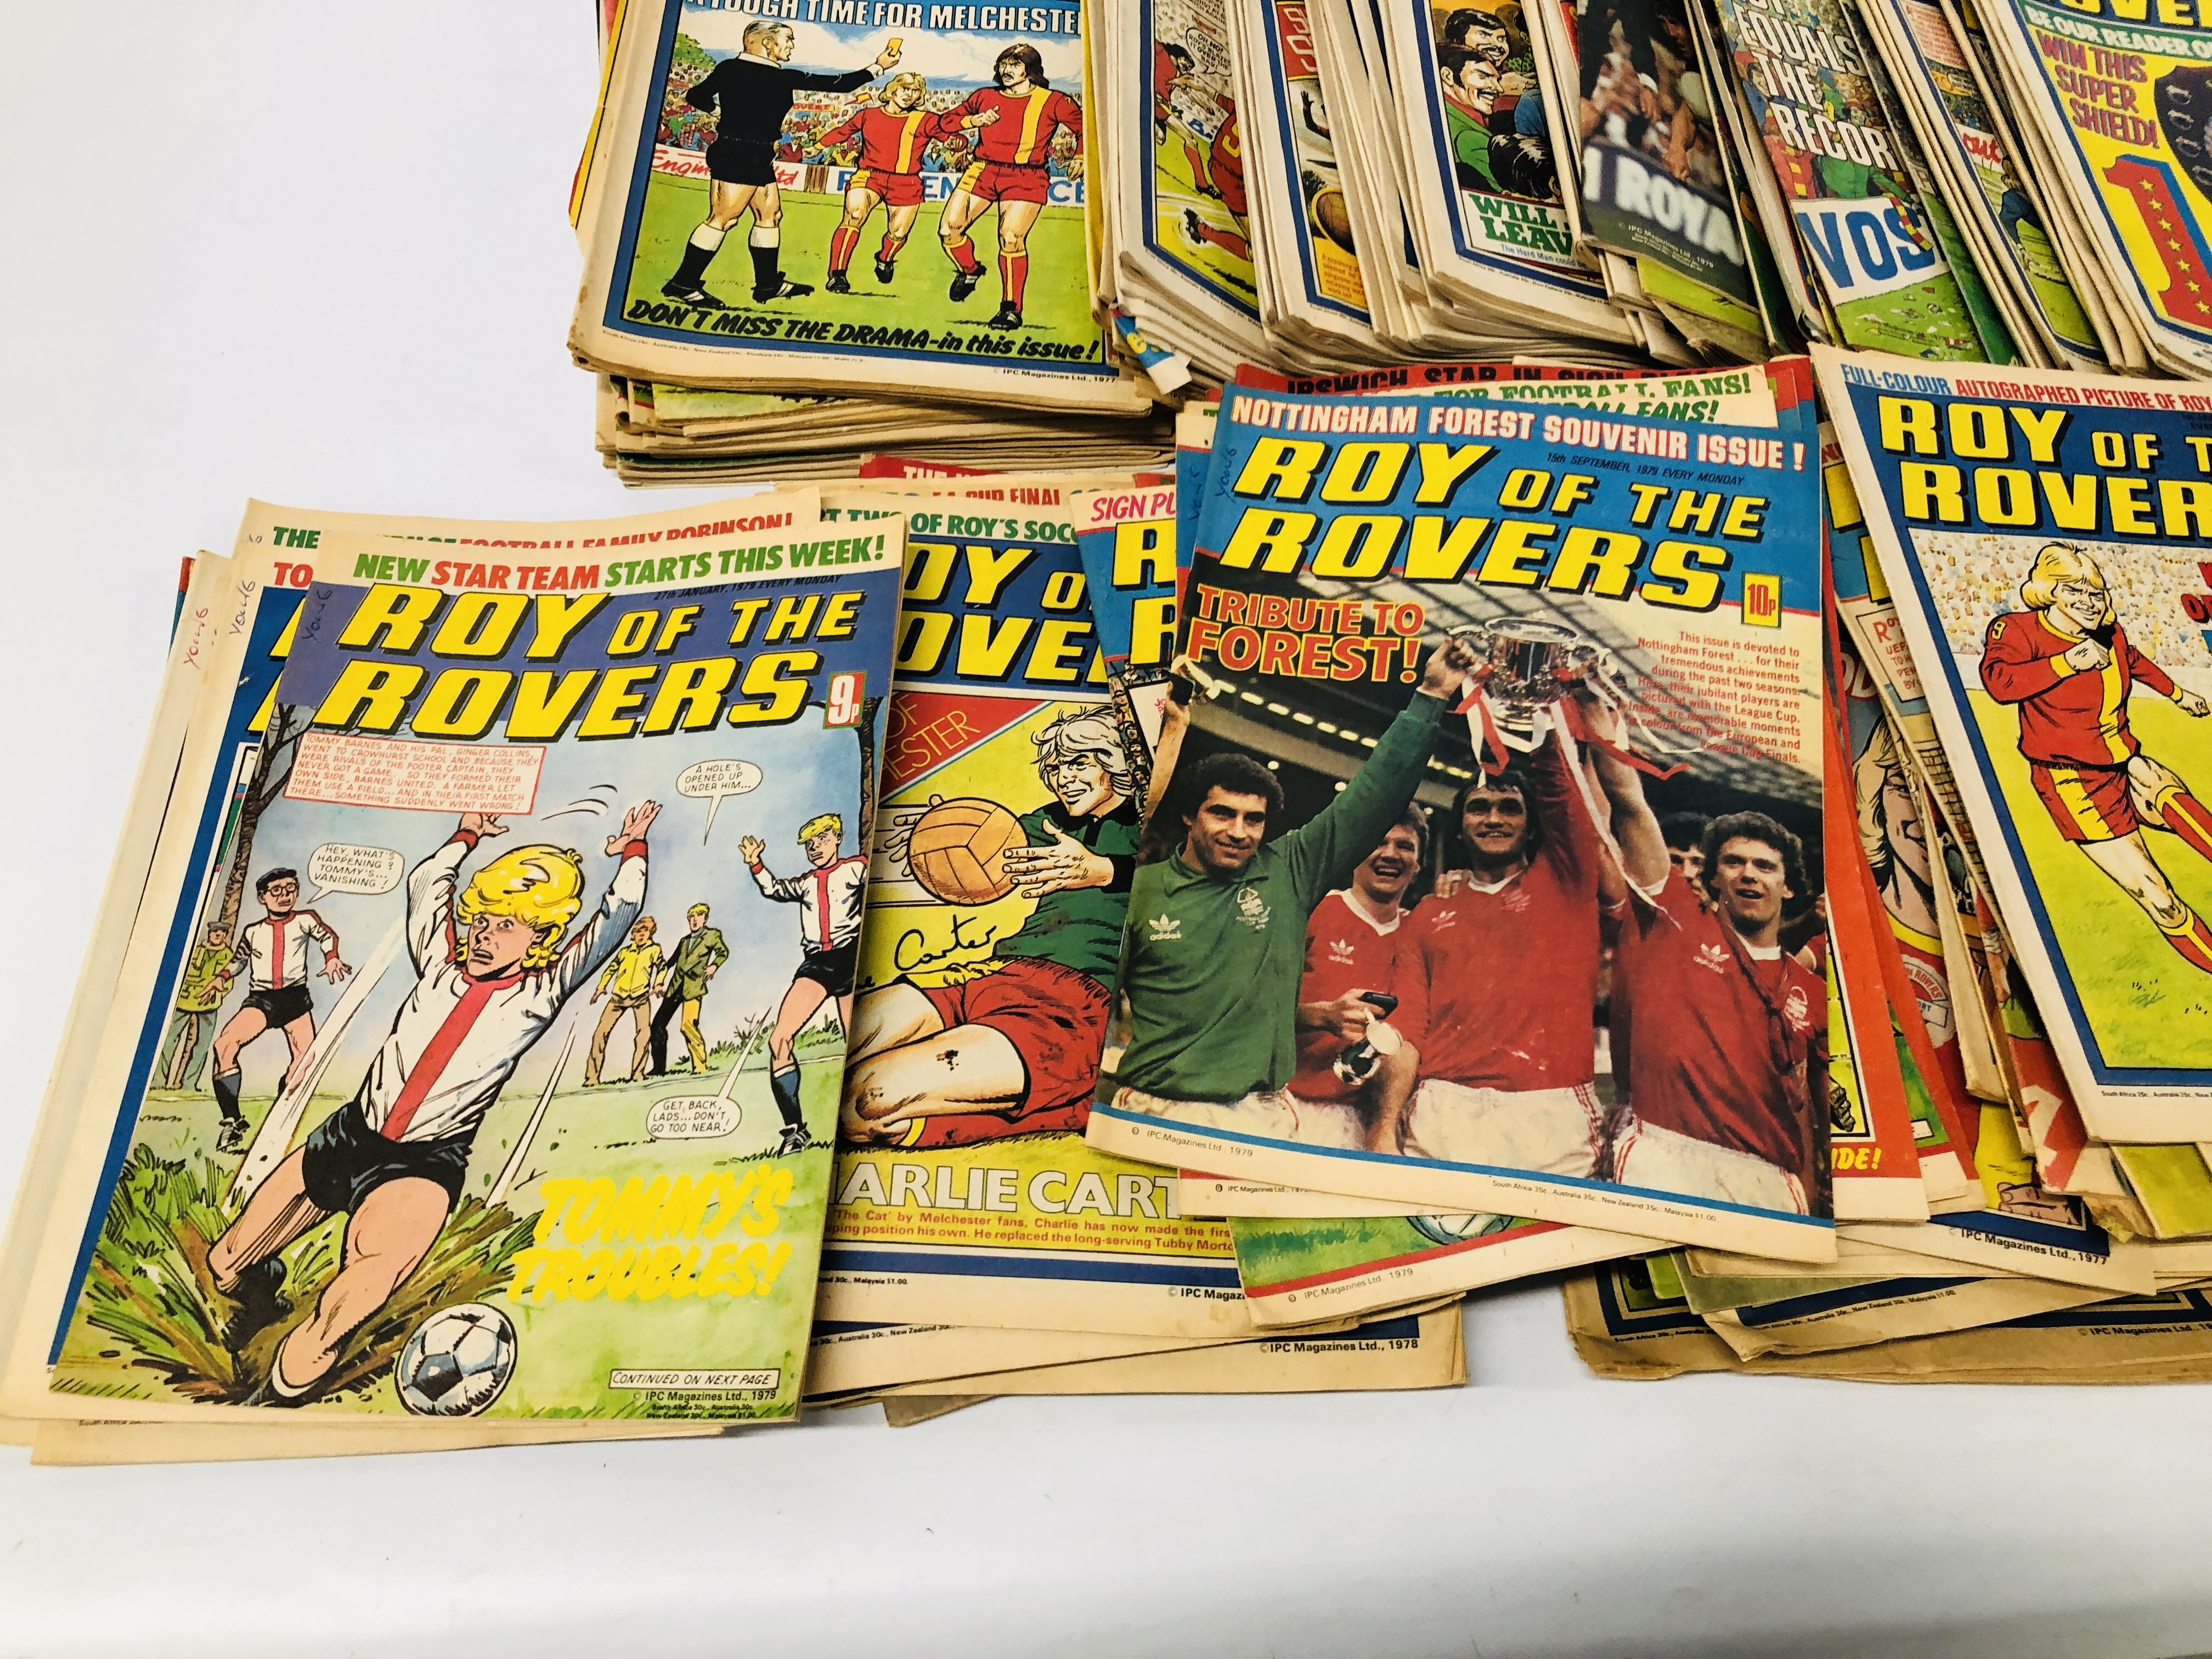 COLLECTION OF VINTAGE MAGAZINES TO INCLUDE MAINLY "ROY OF THE ROVERS" ETC. - Image 4 of 5